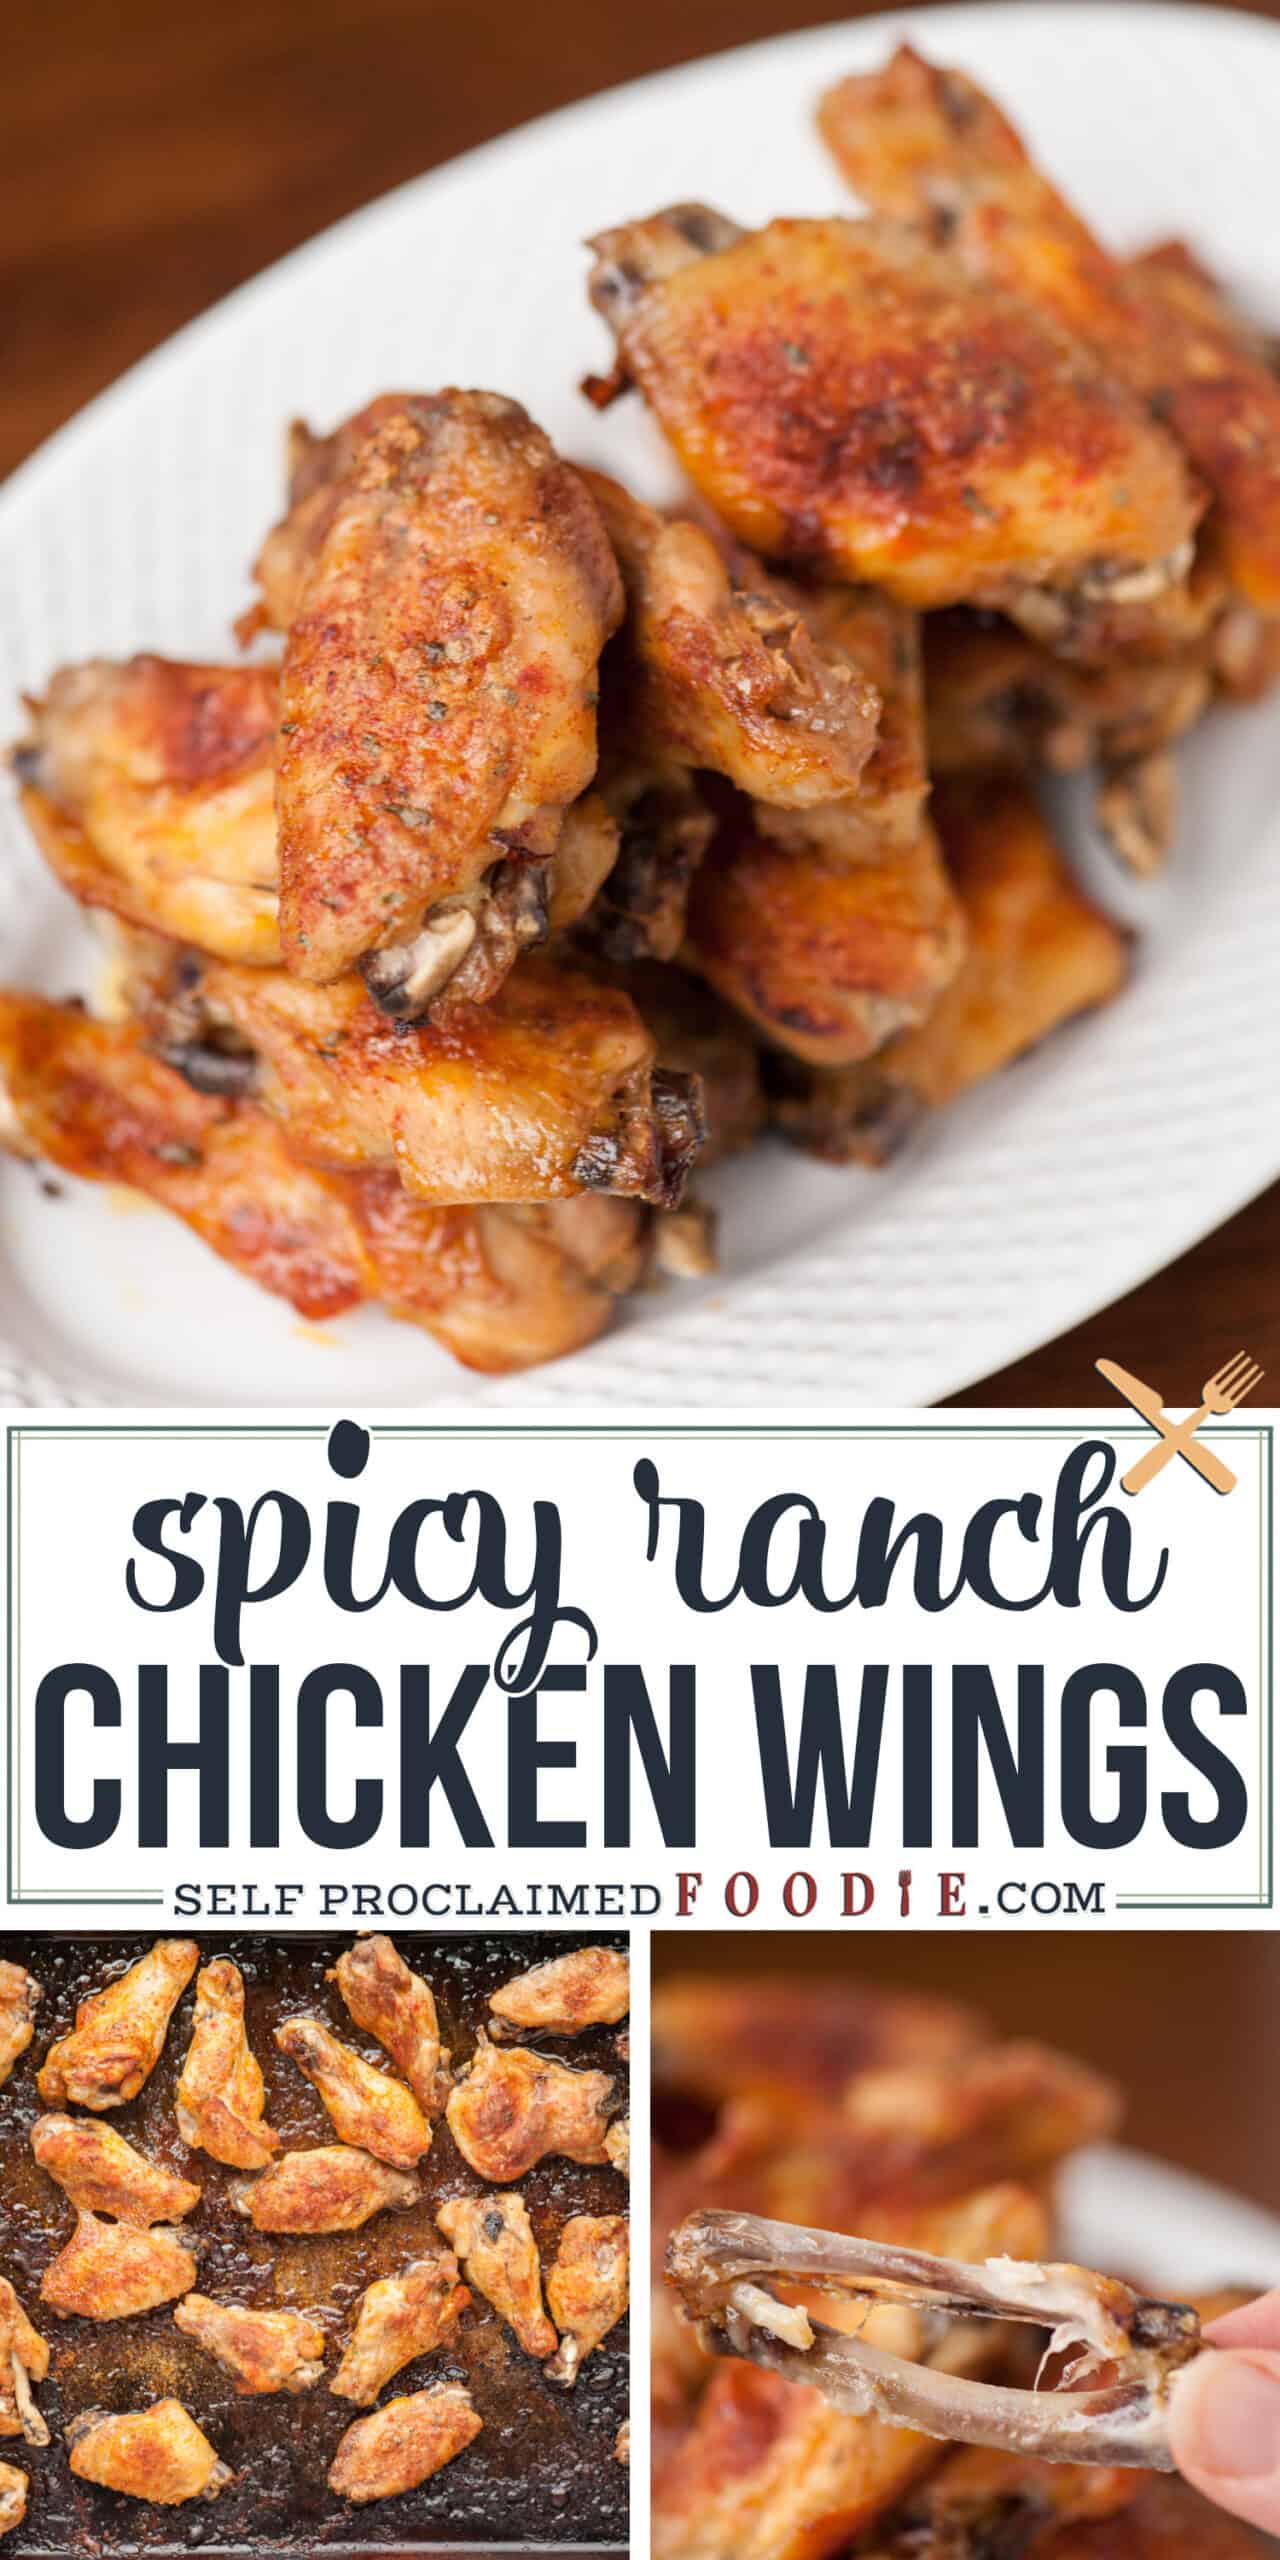 Spicy Ranch Chicken Wings - Self Proclaimed Foodie